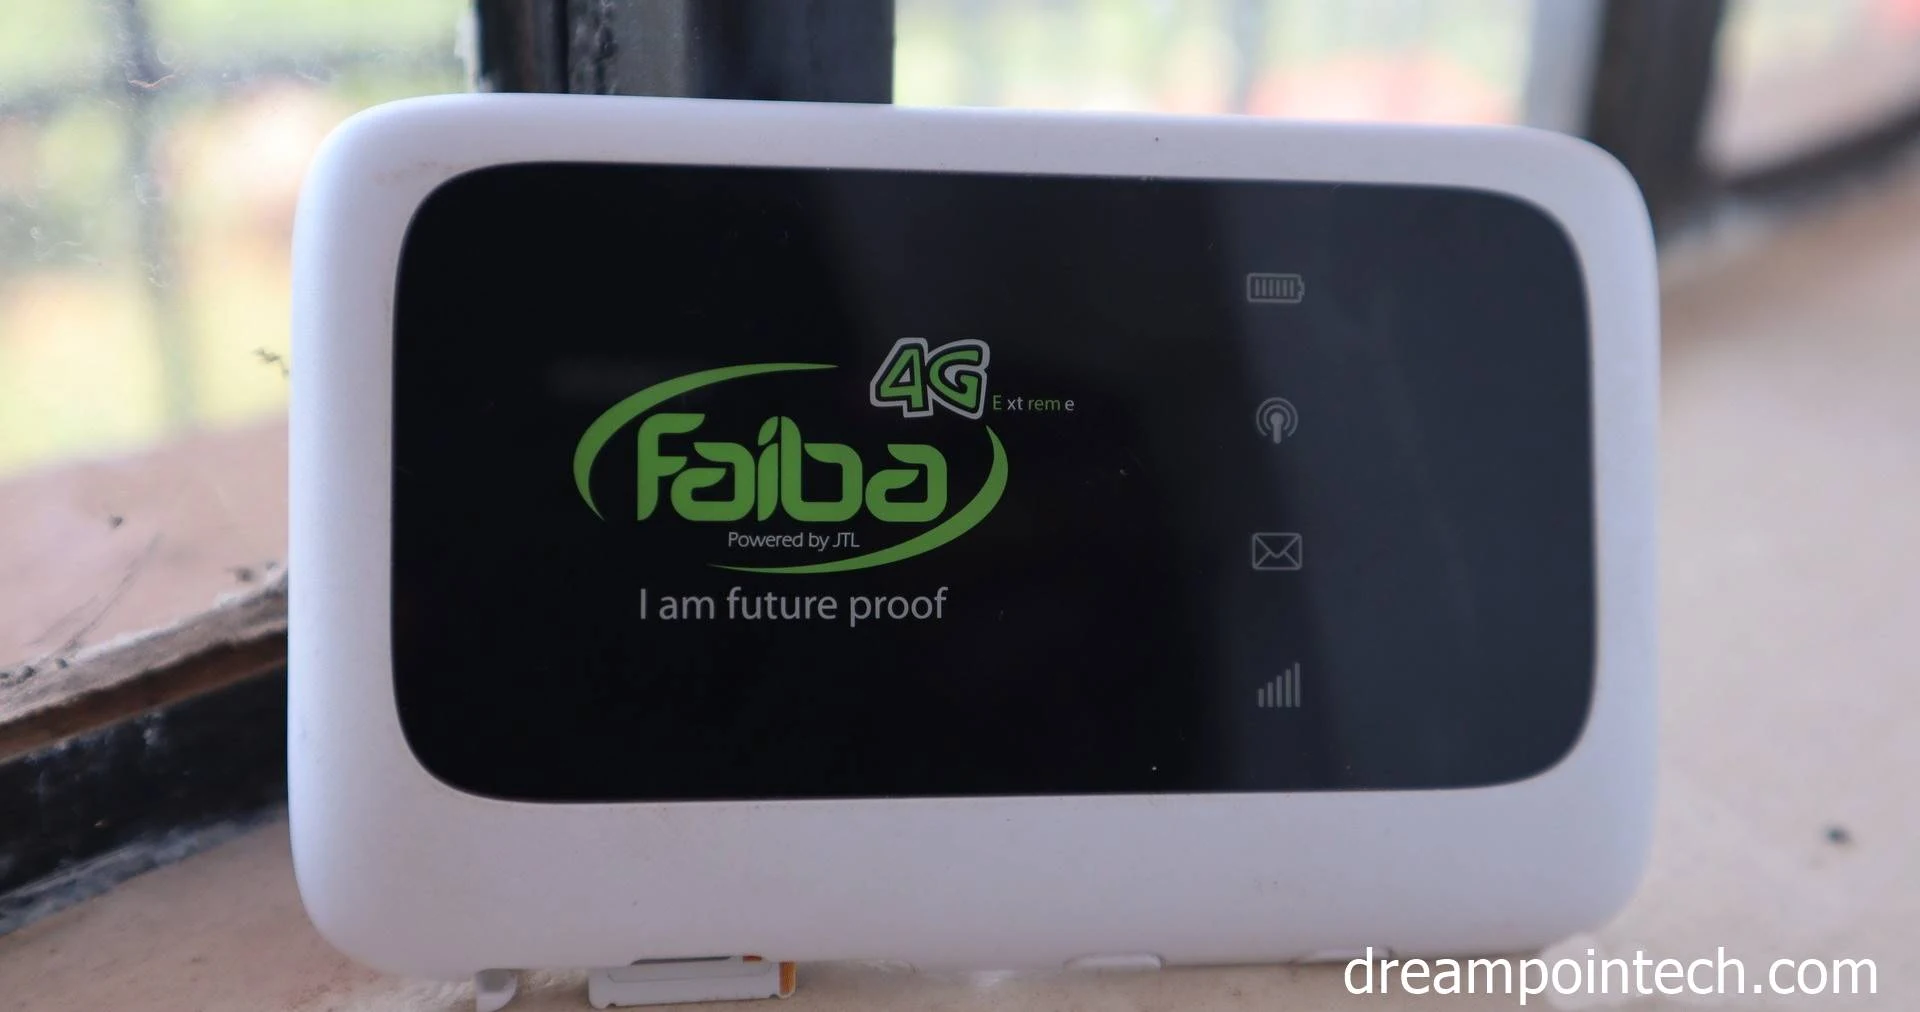 C. Modems or Routers that are compatible with the Faiba 4G Network